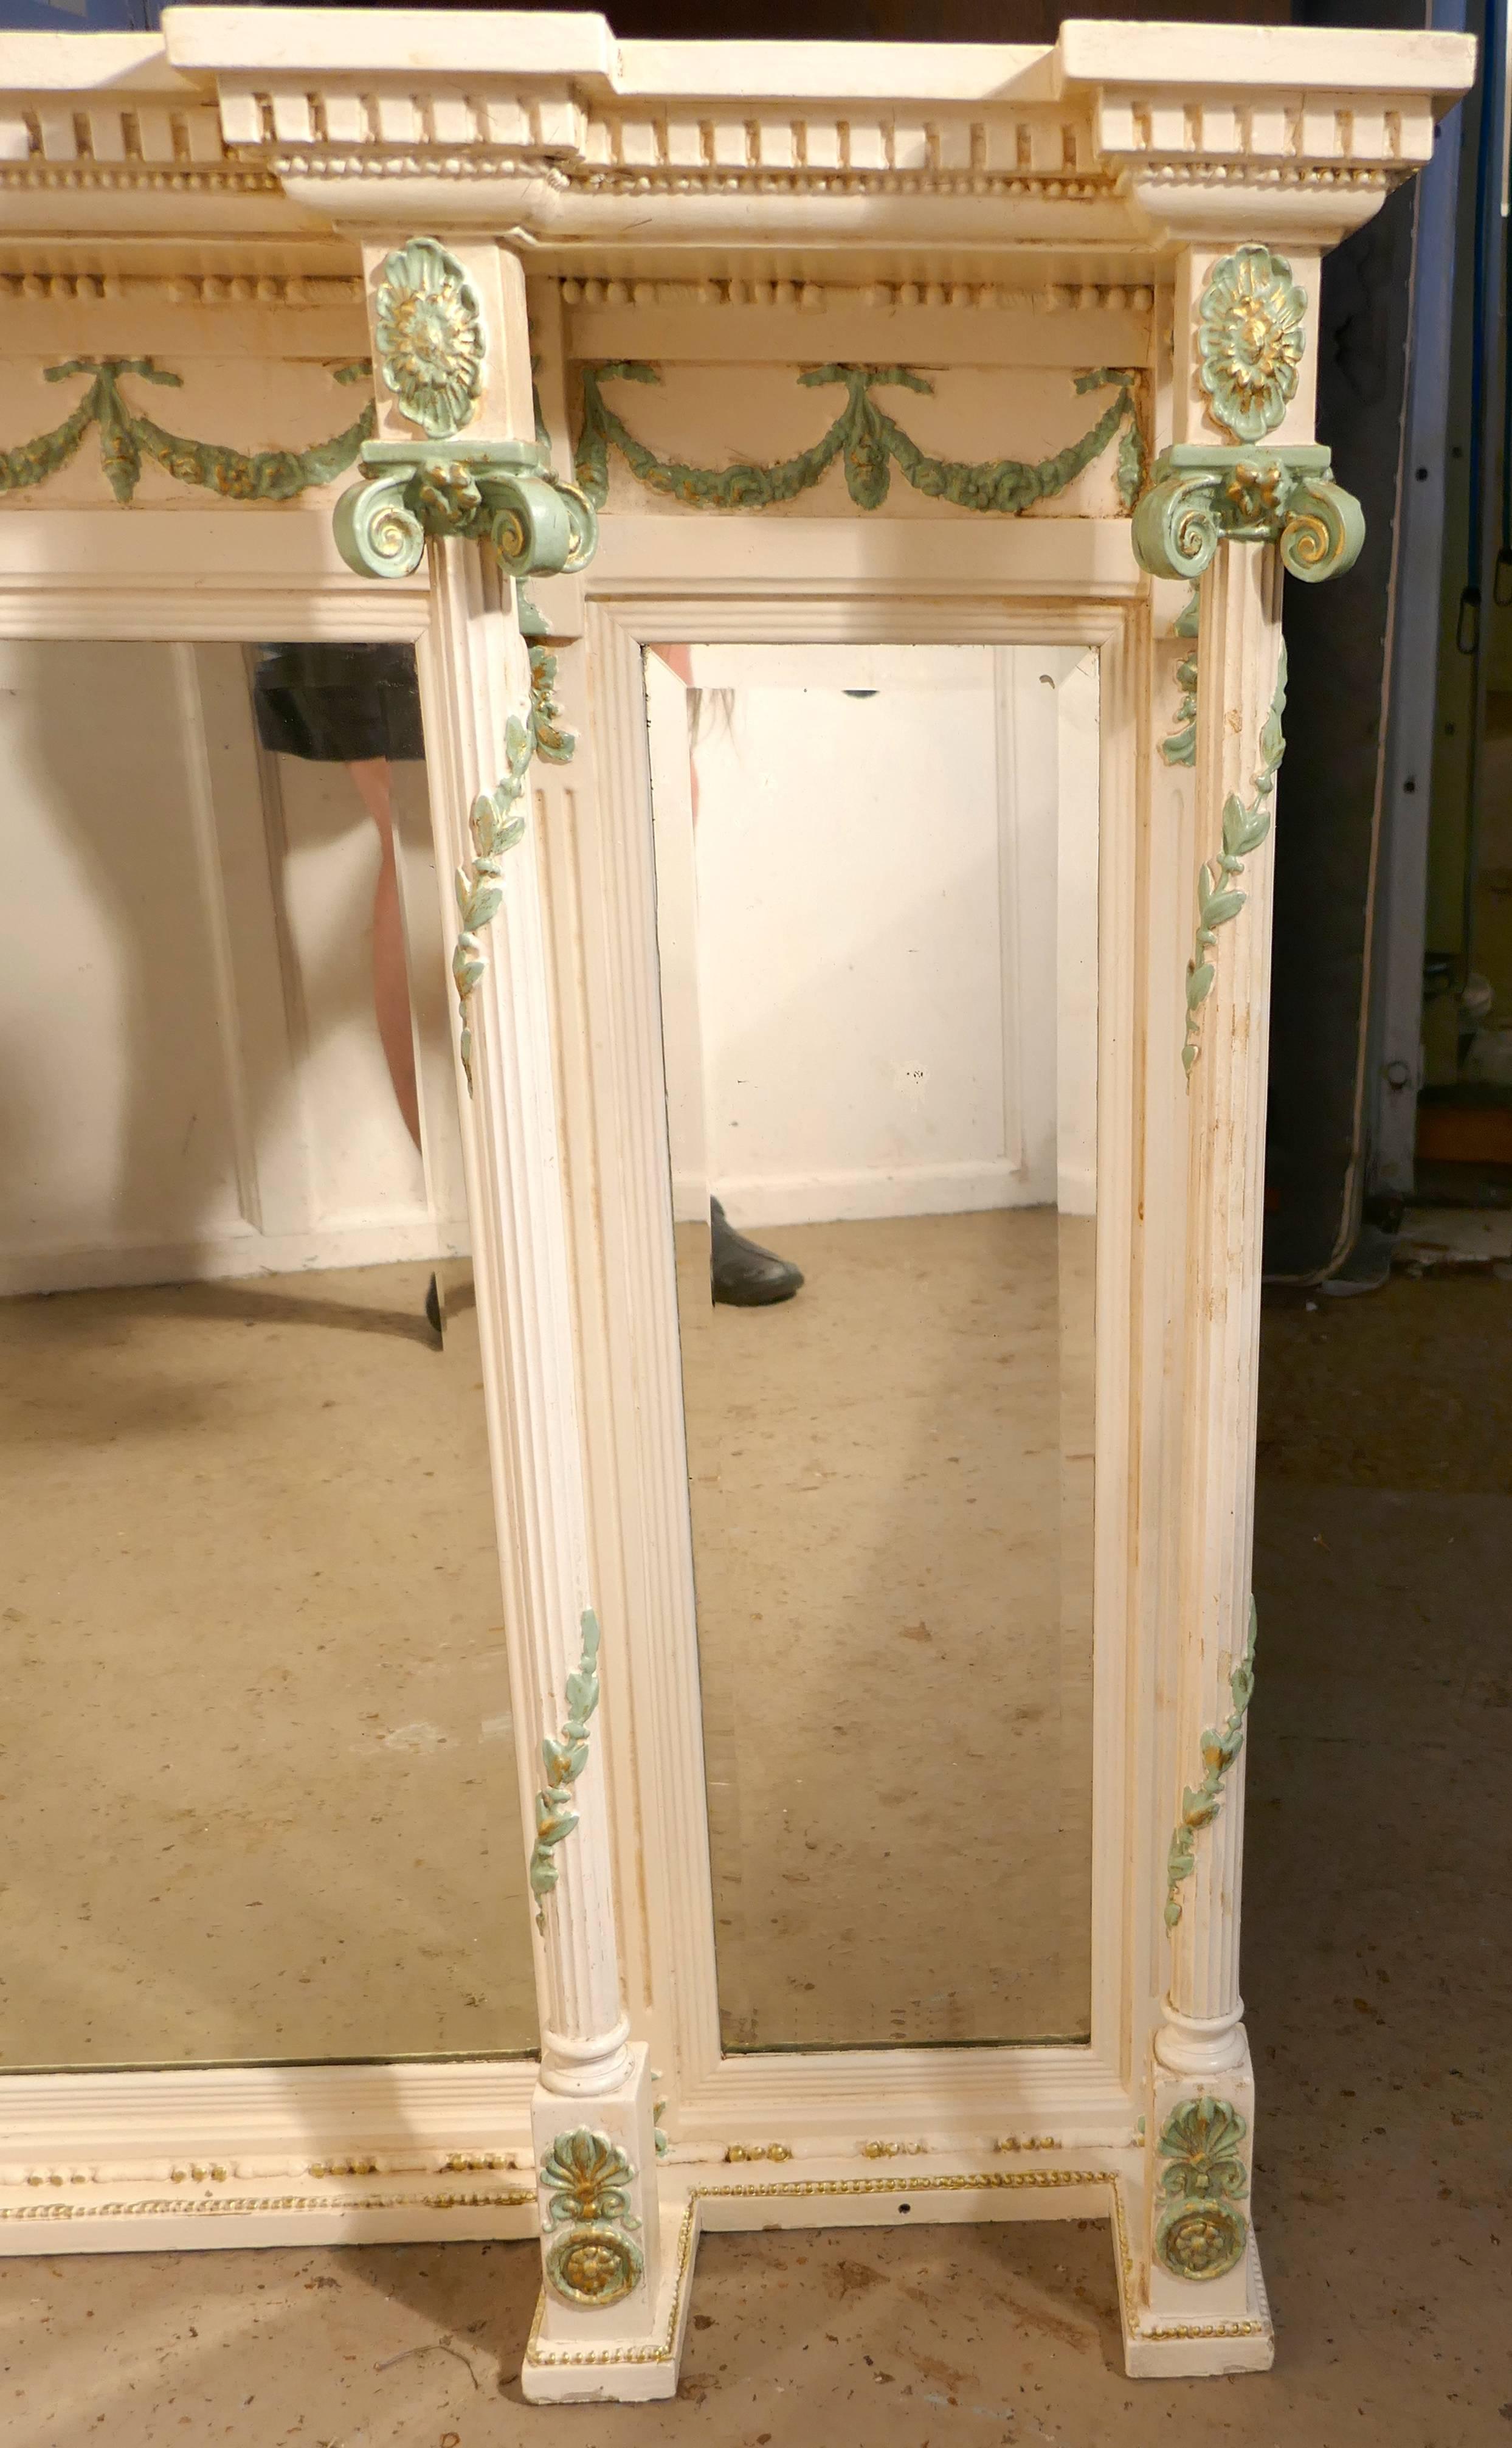 19th century painted over-mantel

A charming 19th century painted Regency style over-mantel
The carved Frame has three beveled glass mirrors, each bordered with Corinthian style columns and a break front dental cornice around the top The mirror